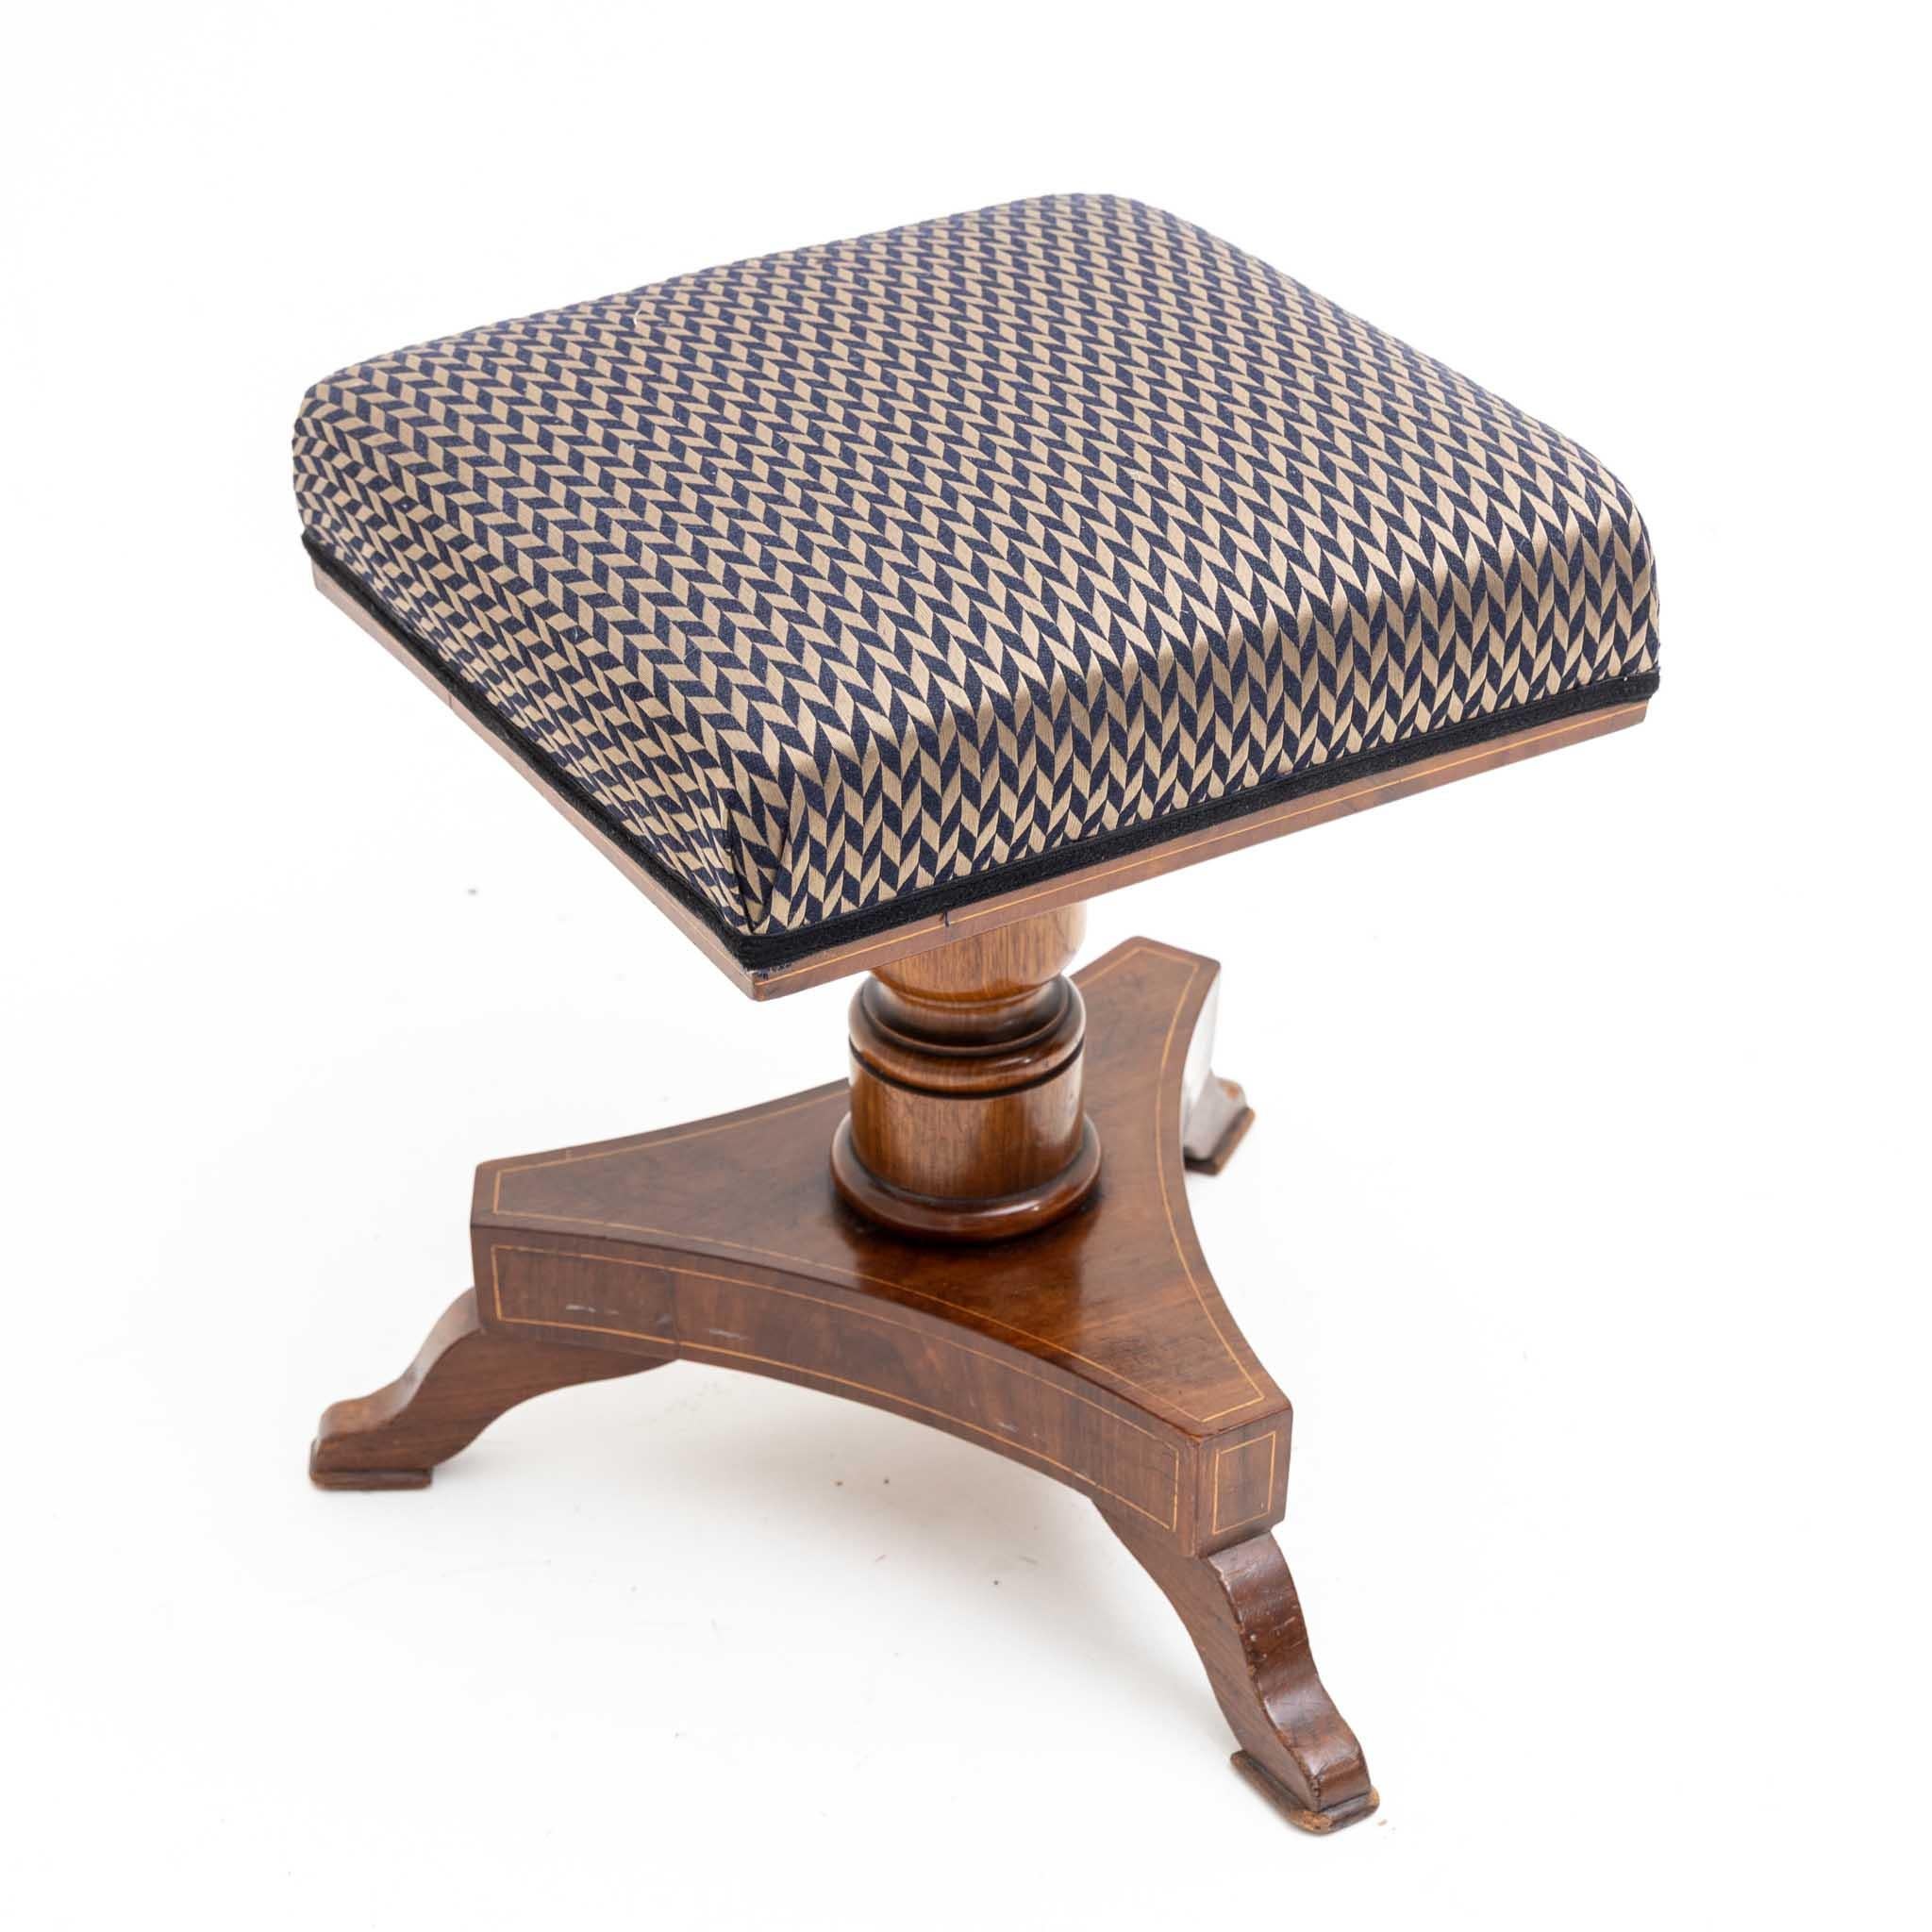 Piano stool on a trefoil stand with low S feet and square seat. The stool is veneered in mahogany with thread inlays and has been reupholstered. Uninterpreted royal monogram on the underside.